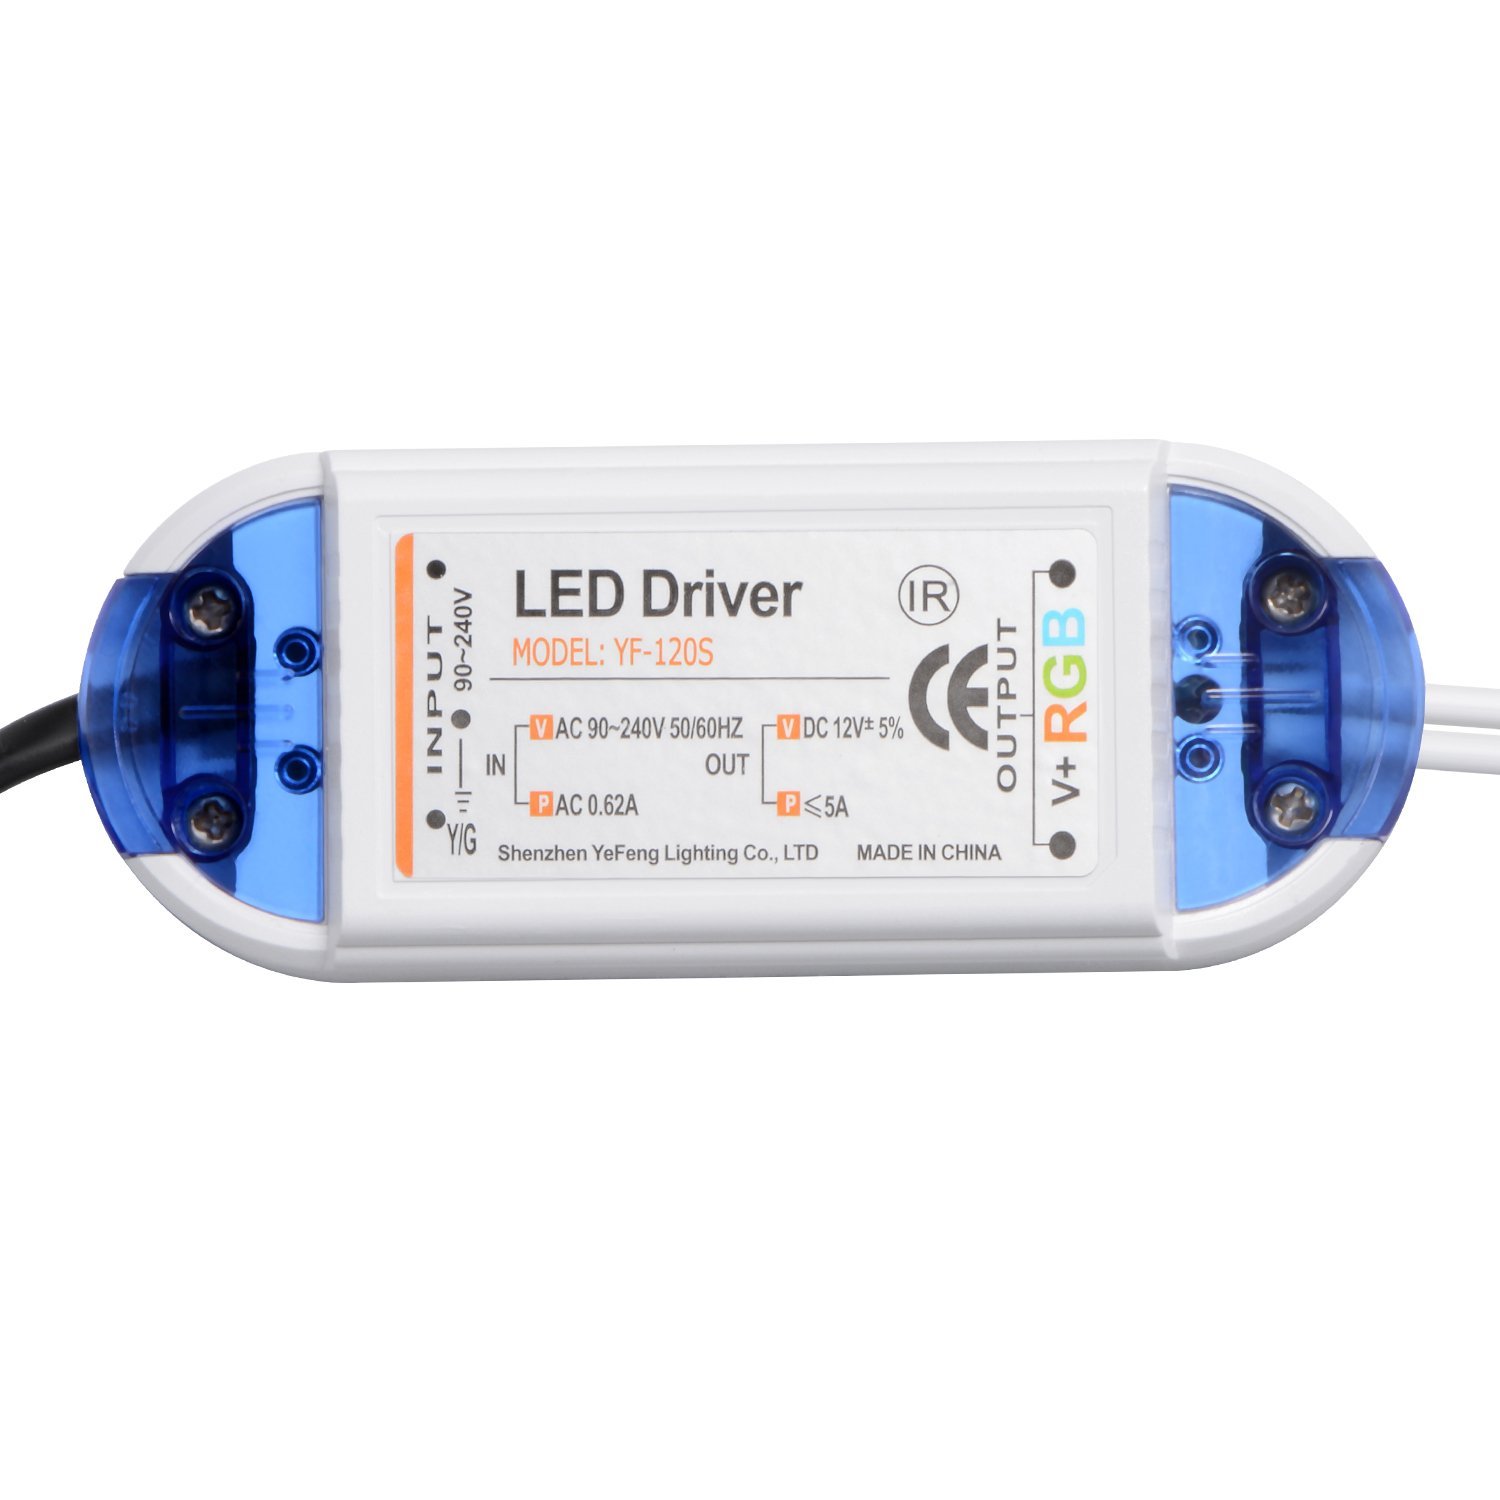 ZX-AC90-240V-To-DC12V-5A-60W-Power-Adpter-LED-Driver-with-24-Keys-Remote-Control-for-RGB-Strip-Light-1199863-3